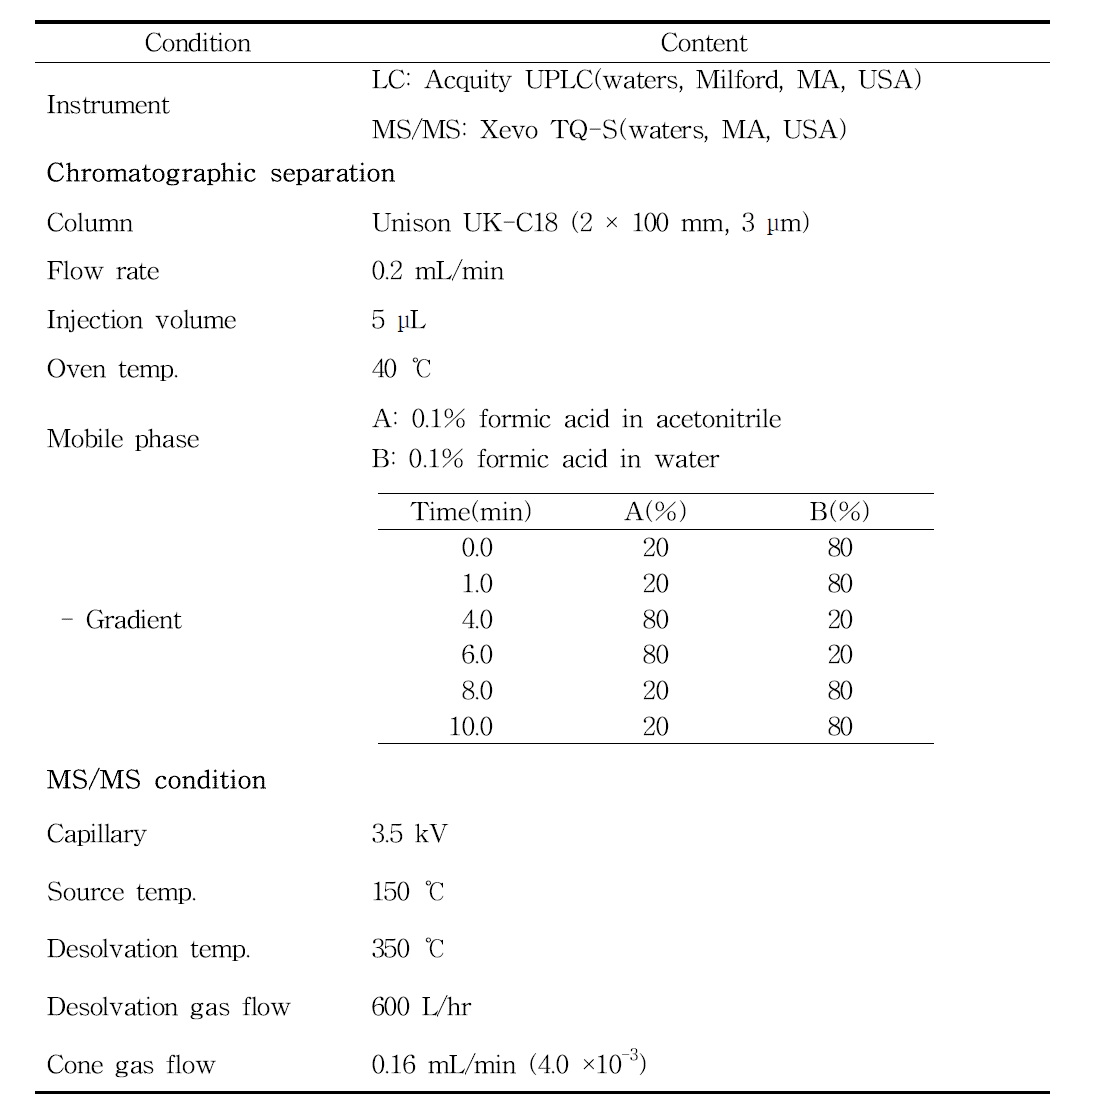 Analytical conditions for the determination of cyclaniliprole and NK-1375